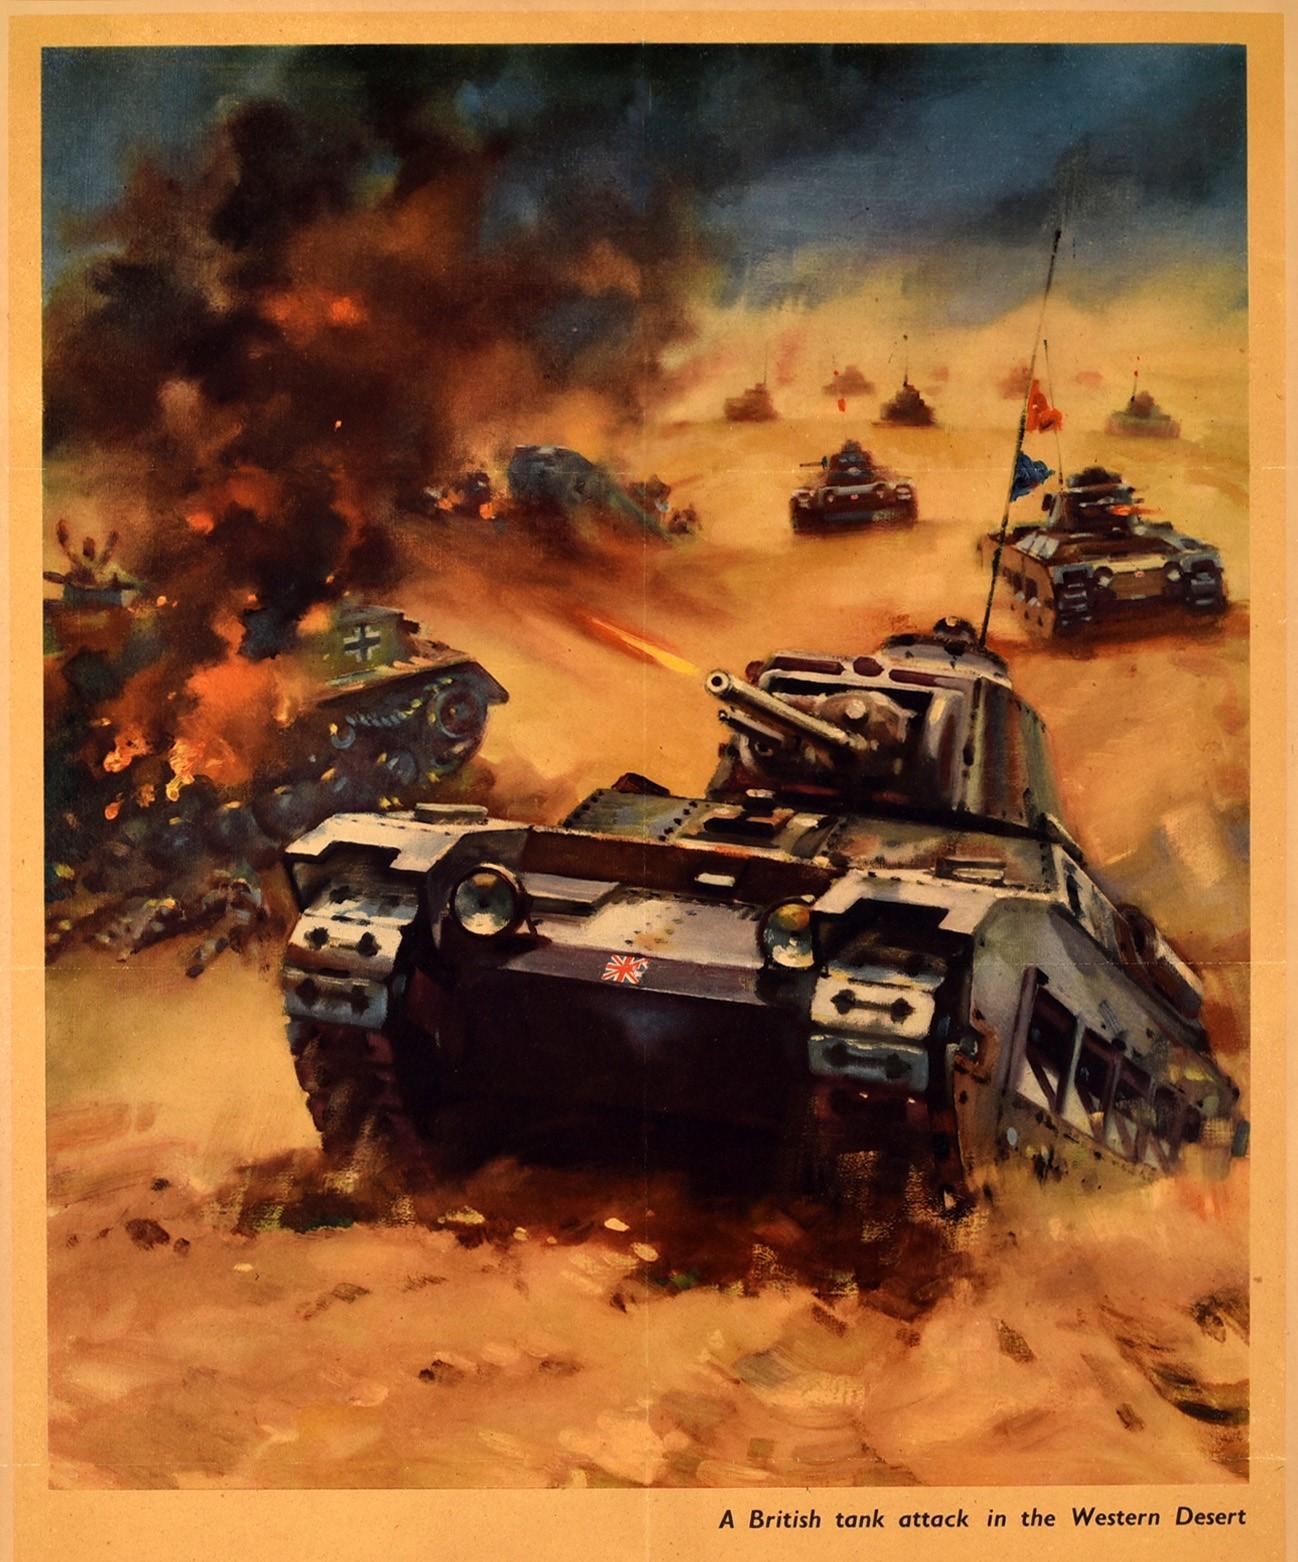 Original vintage World War Two propaganda poster, Back Them Up! A British tank attack in the Western Desert, featuring a dynamic illustration of a tank marked with a British flag on the front driving up a small sandy hill with the shot fired from